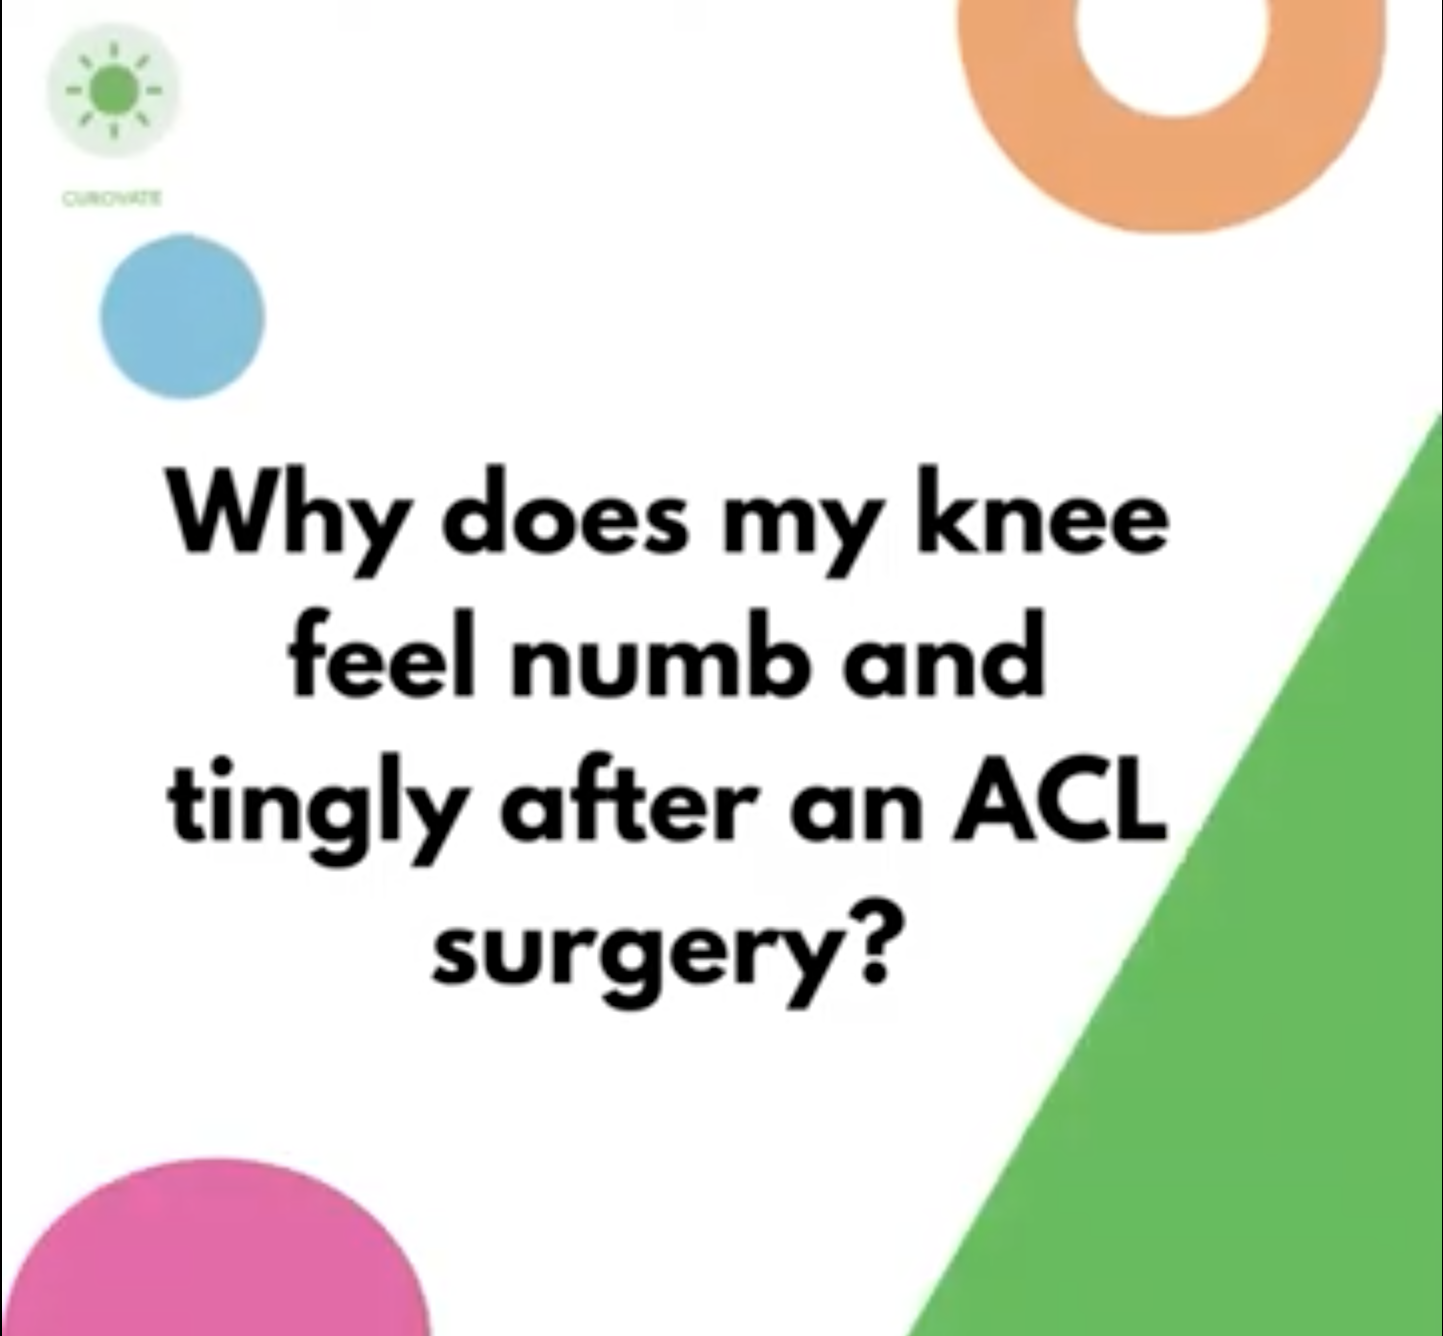 Video: Why does my knee feel numb and tingly after ACL surgery? | Curovate